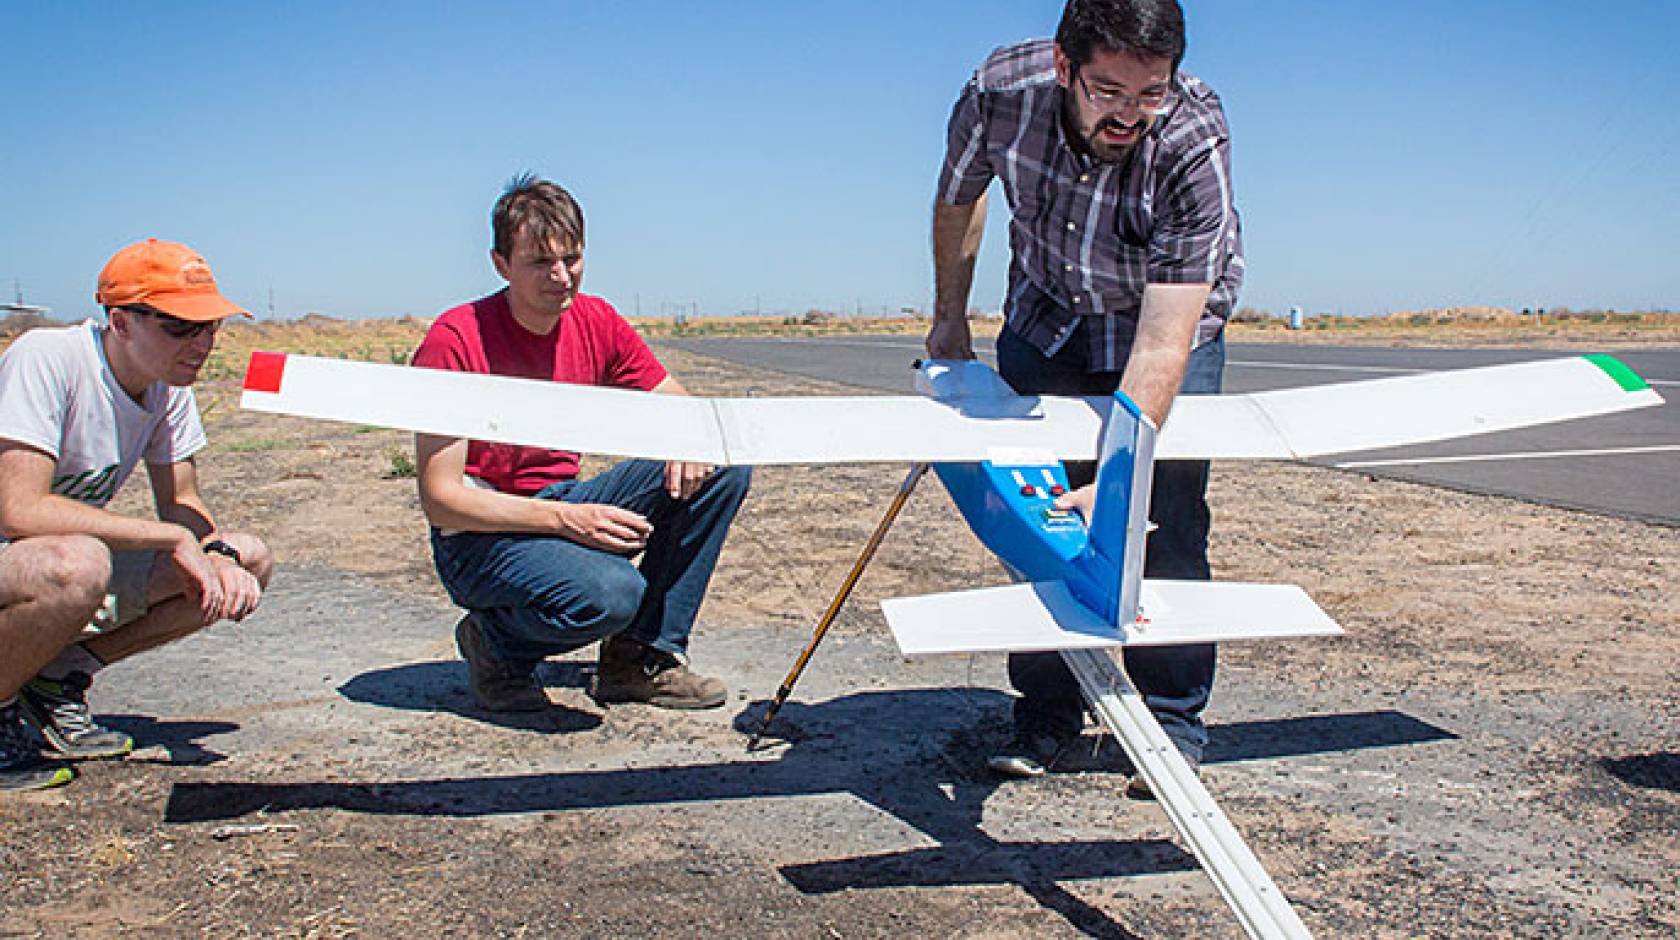 UC Merced students prepare to launch drone